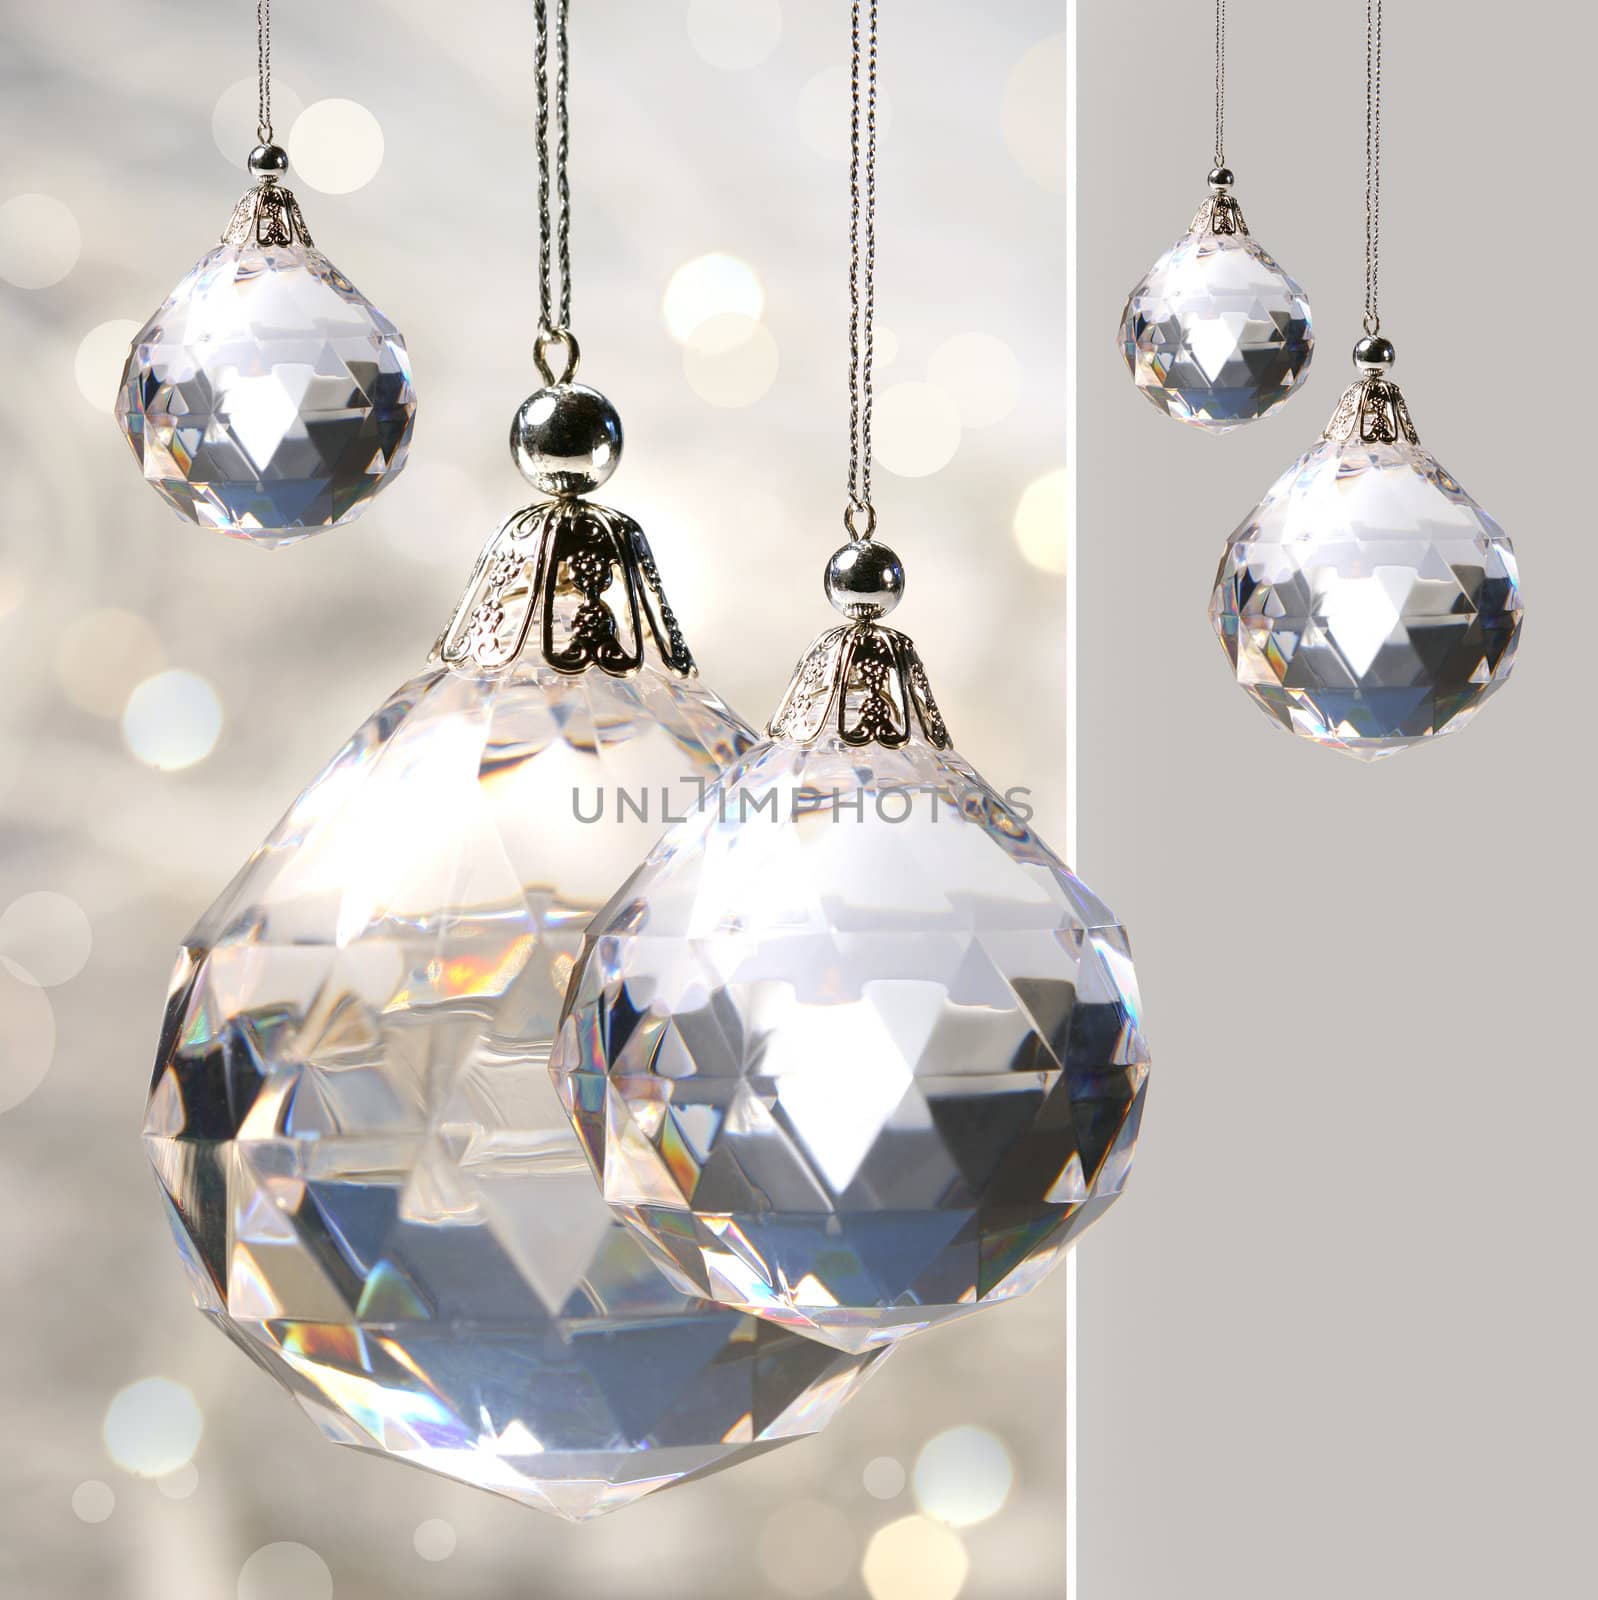 Crystal ornament hanging with lights by Sandralise